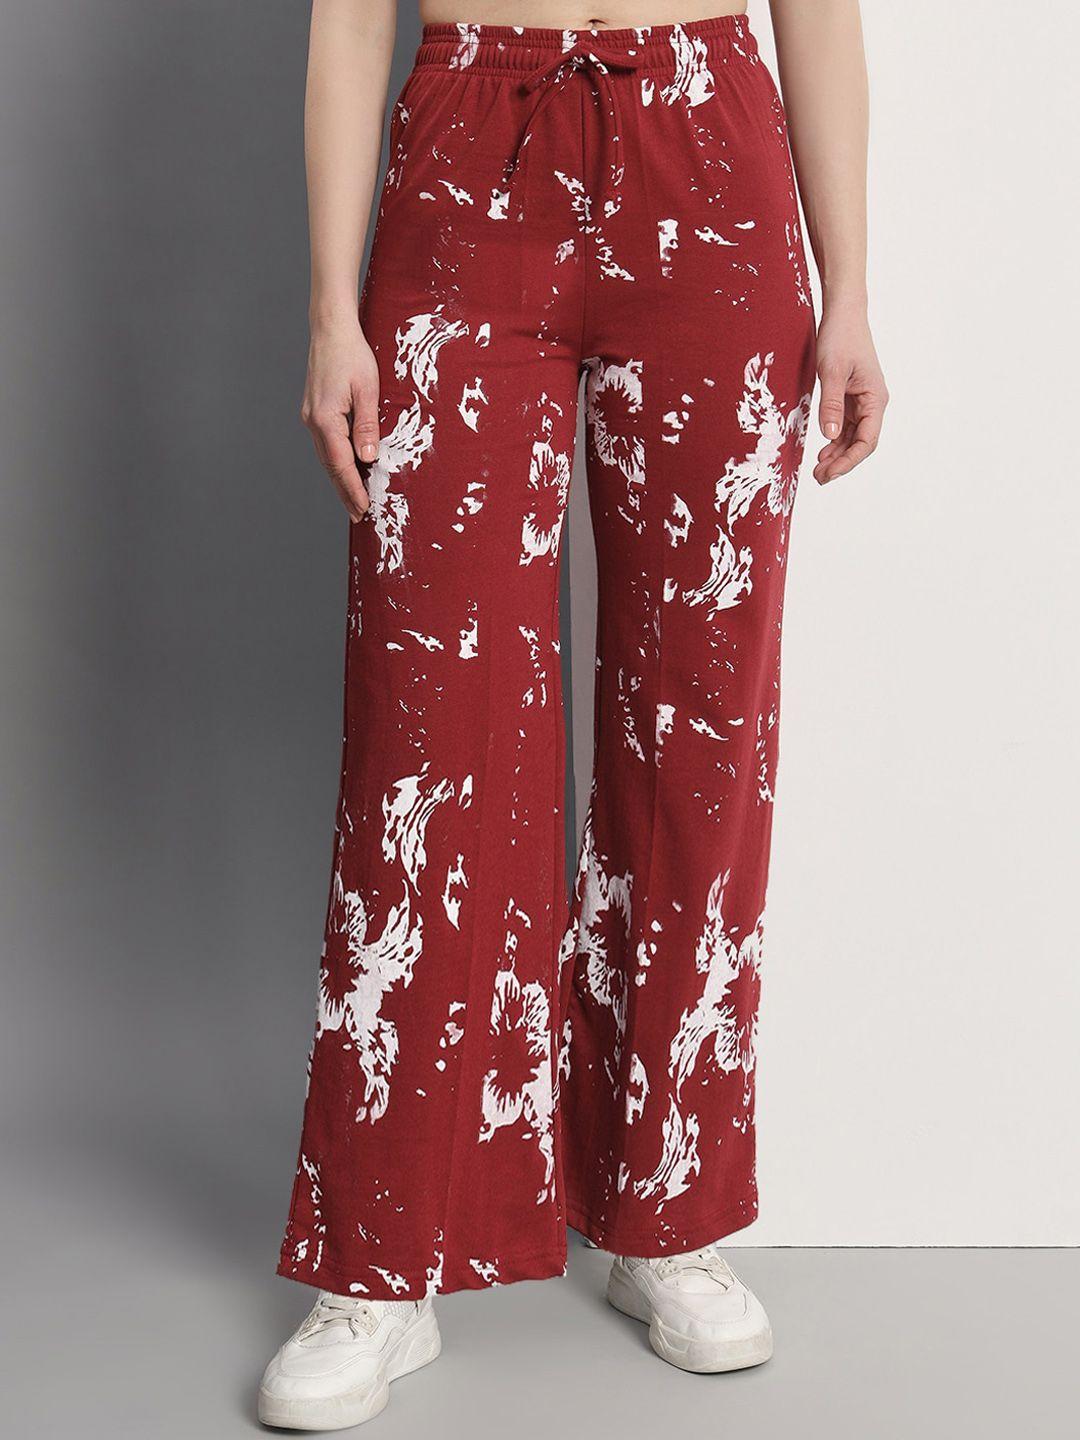 q-rious women floral printed flared fit trousers